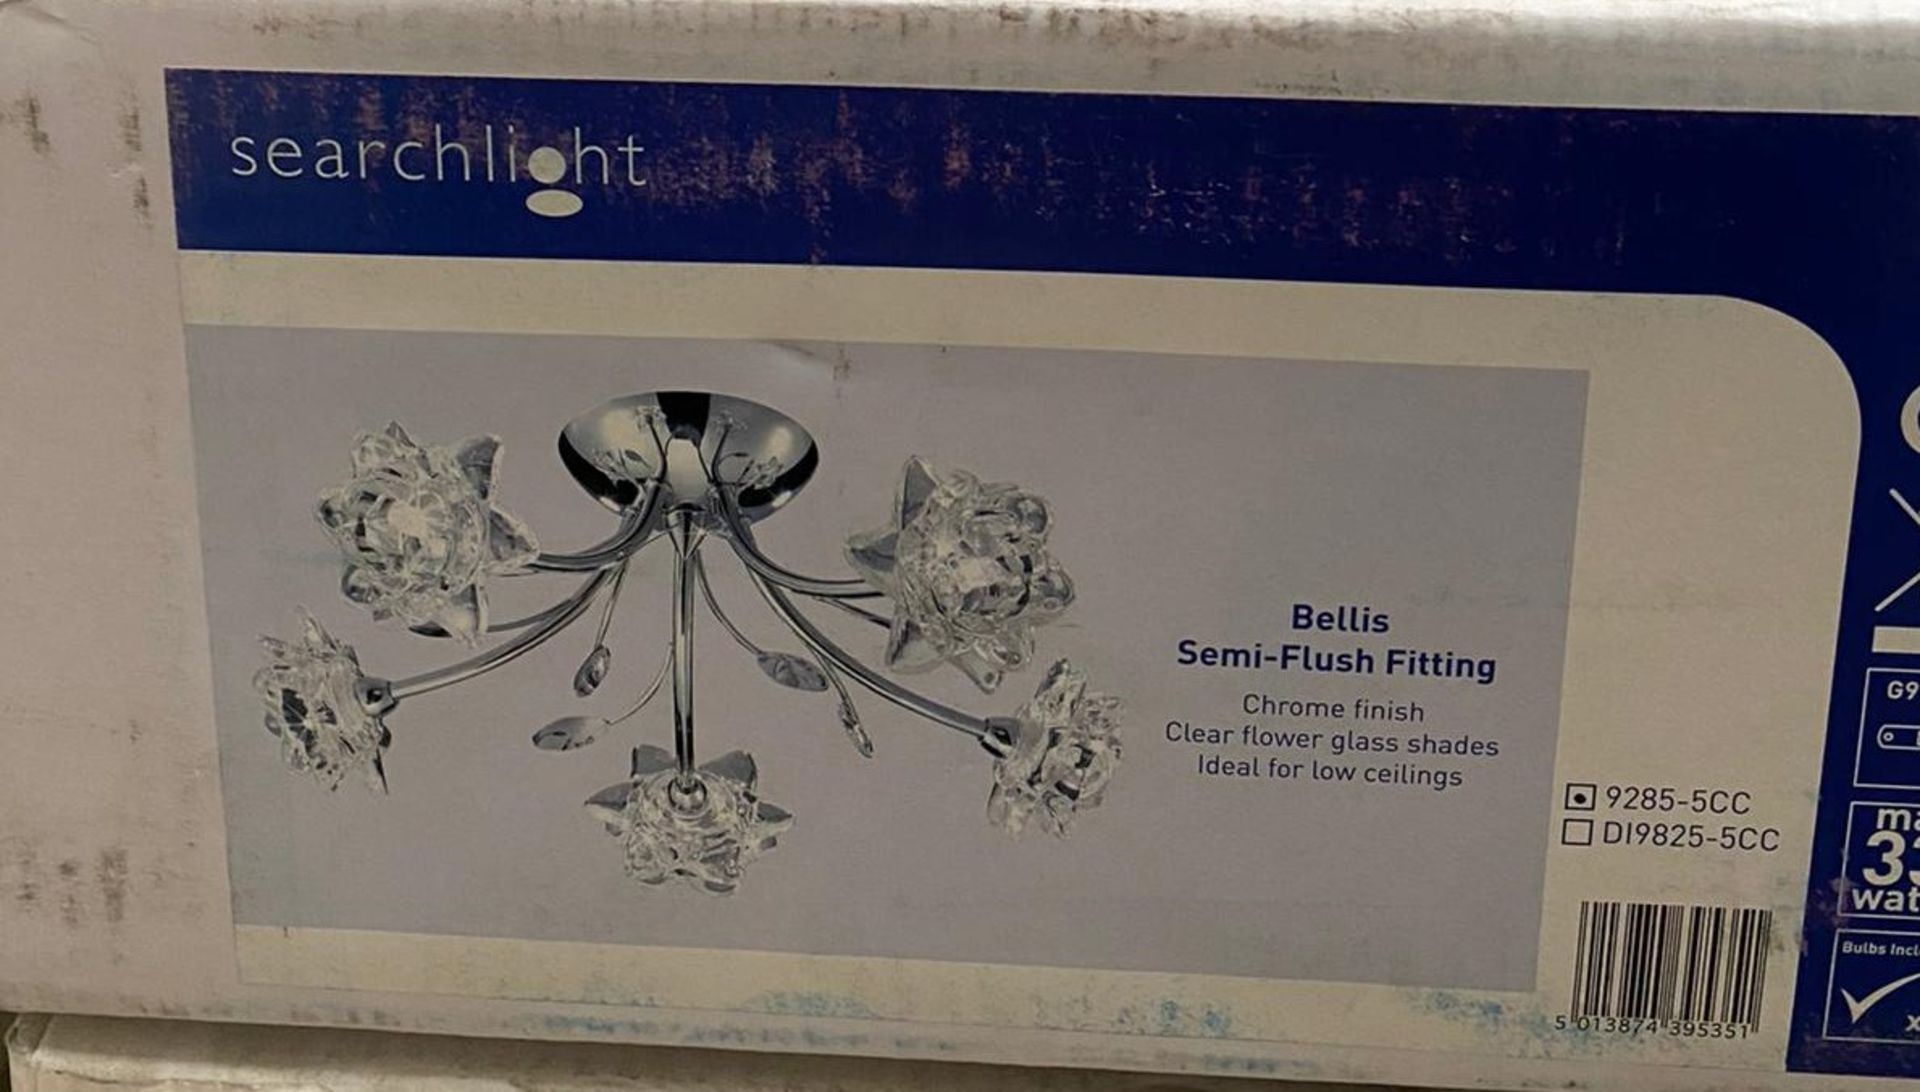 1 x Searchlight Bellis II Semi-flush fitting in chrome - Ref: 9285-5CC - New and Boxed - RRP £100